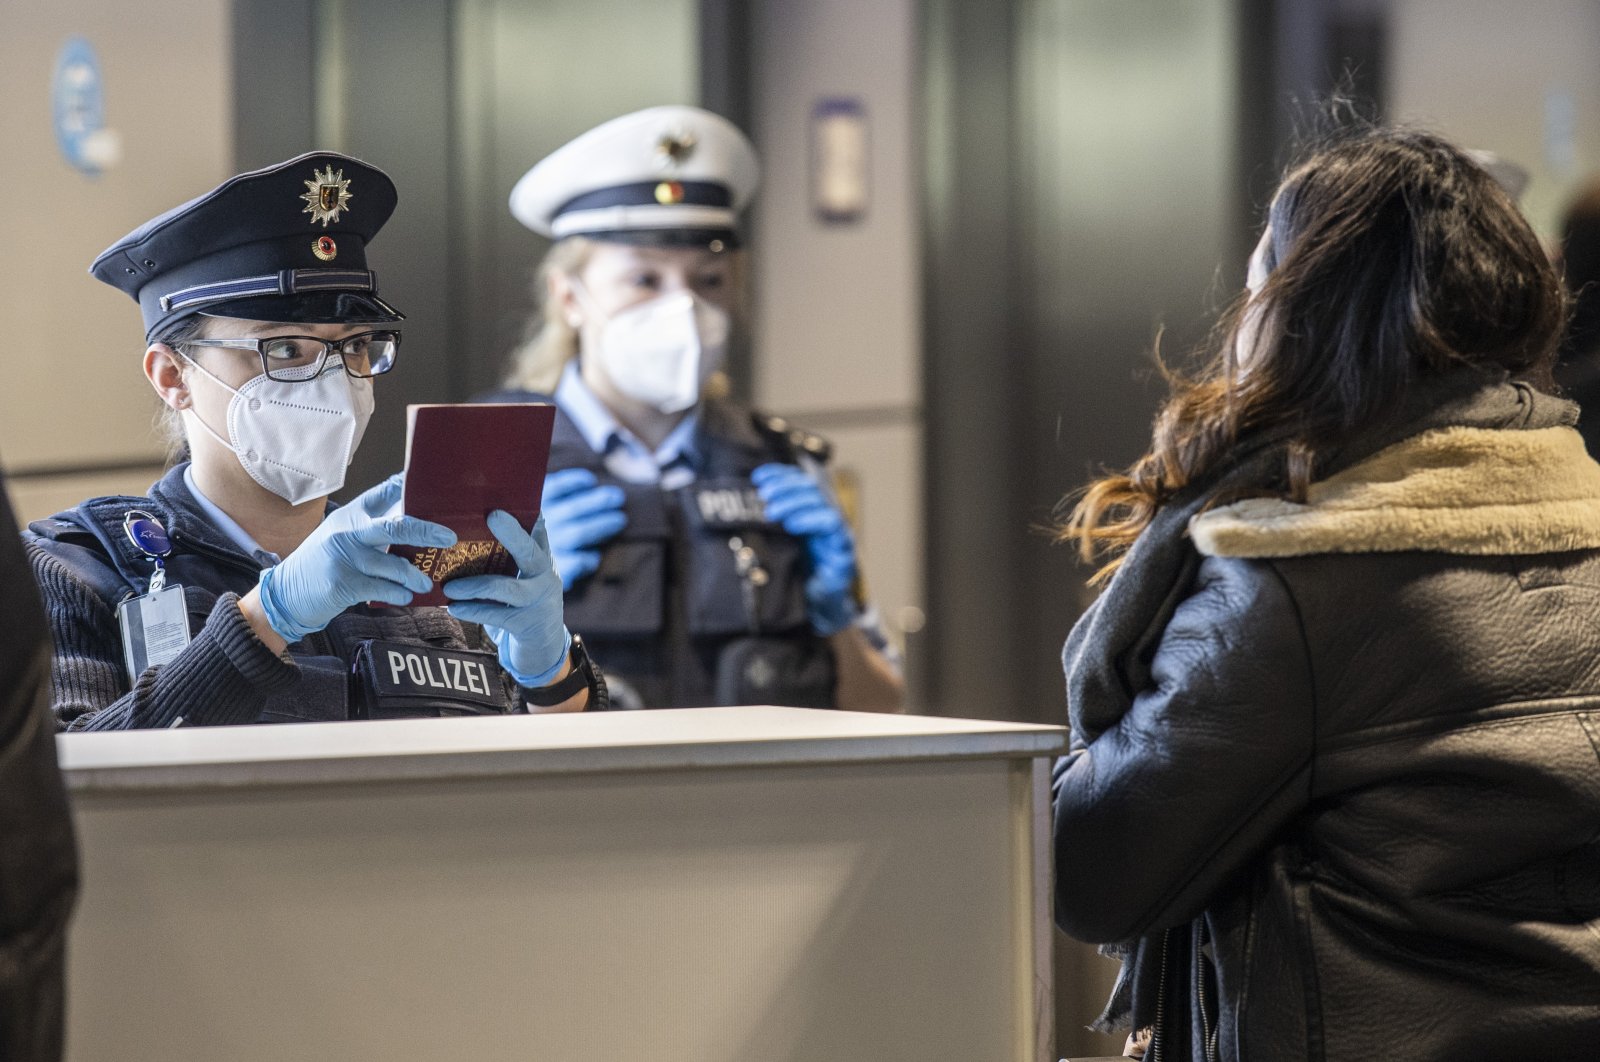 Officers of the German Federal Police check passengers arriving by plane from Prague at the Frankfurt Airport in Frankfurt, Germany on Jan. 24, 2021. (AP Photo)